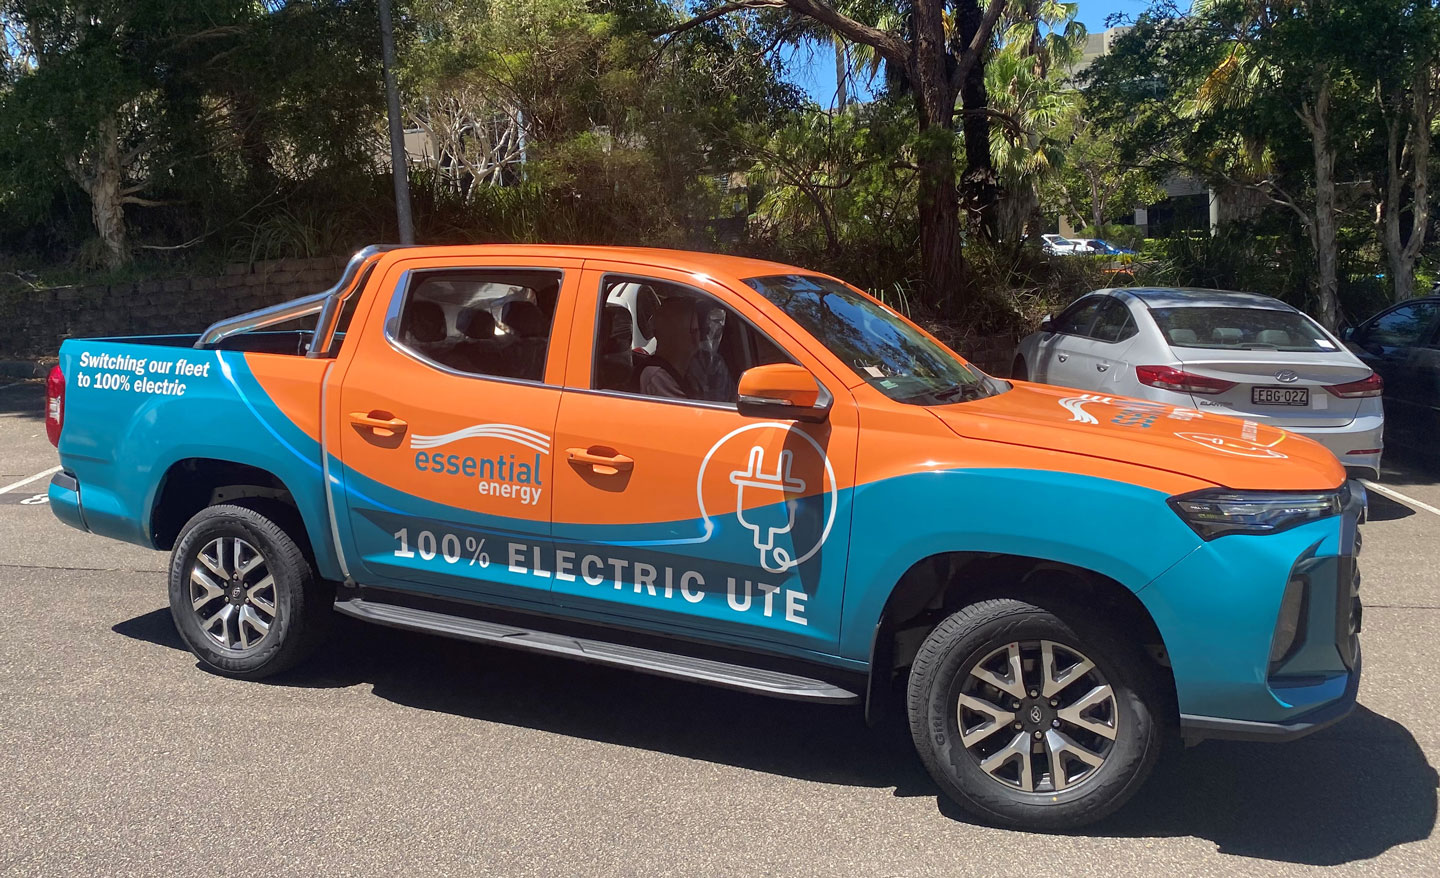 Electric-powered utility truck